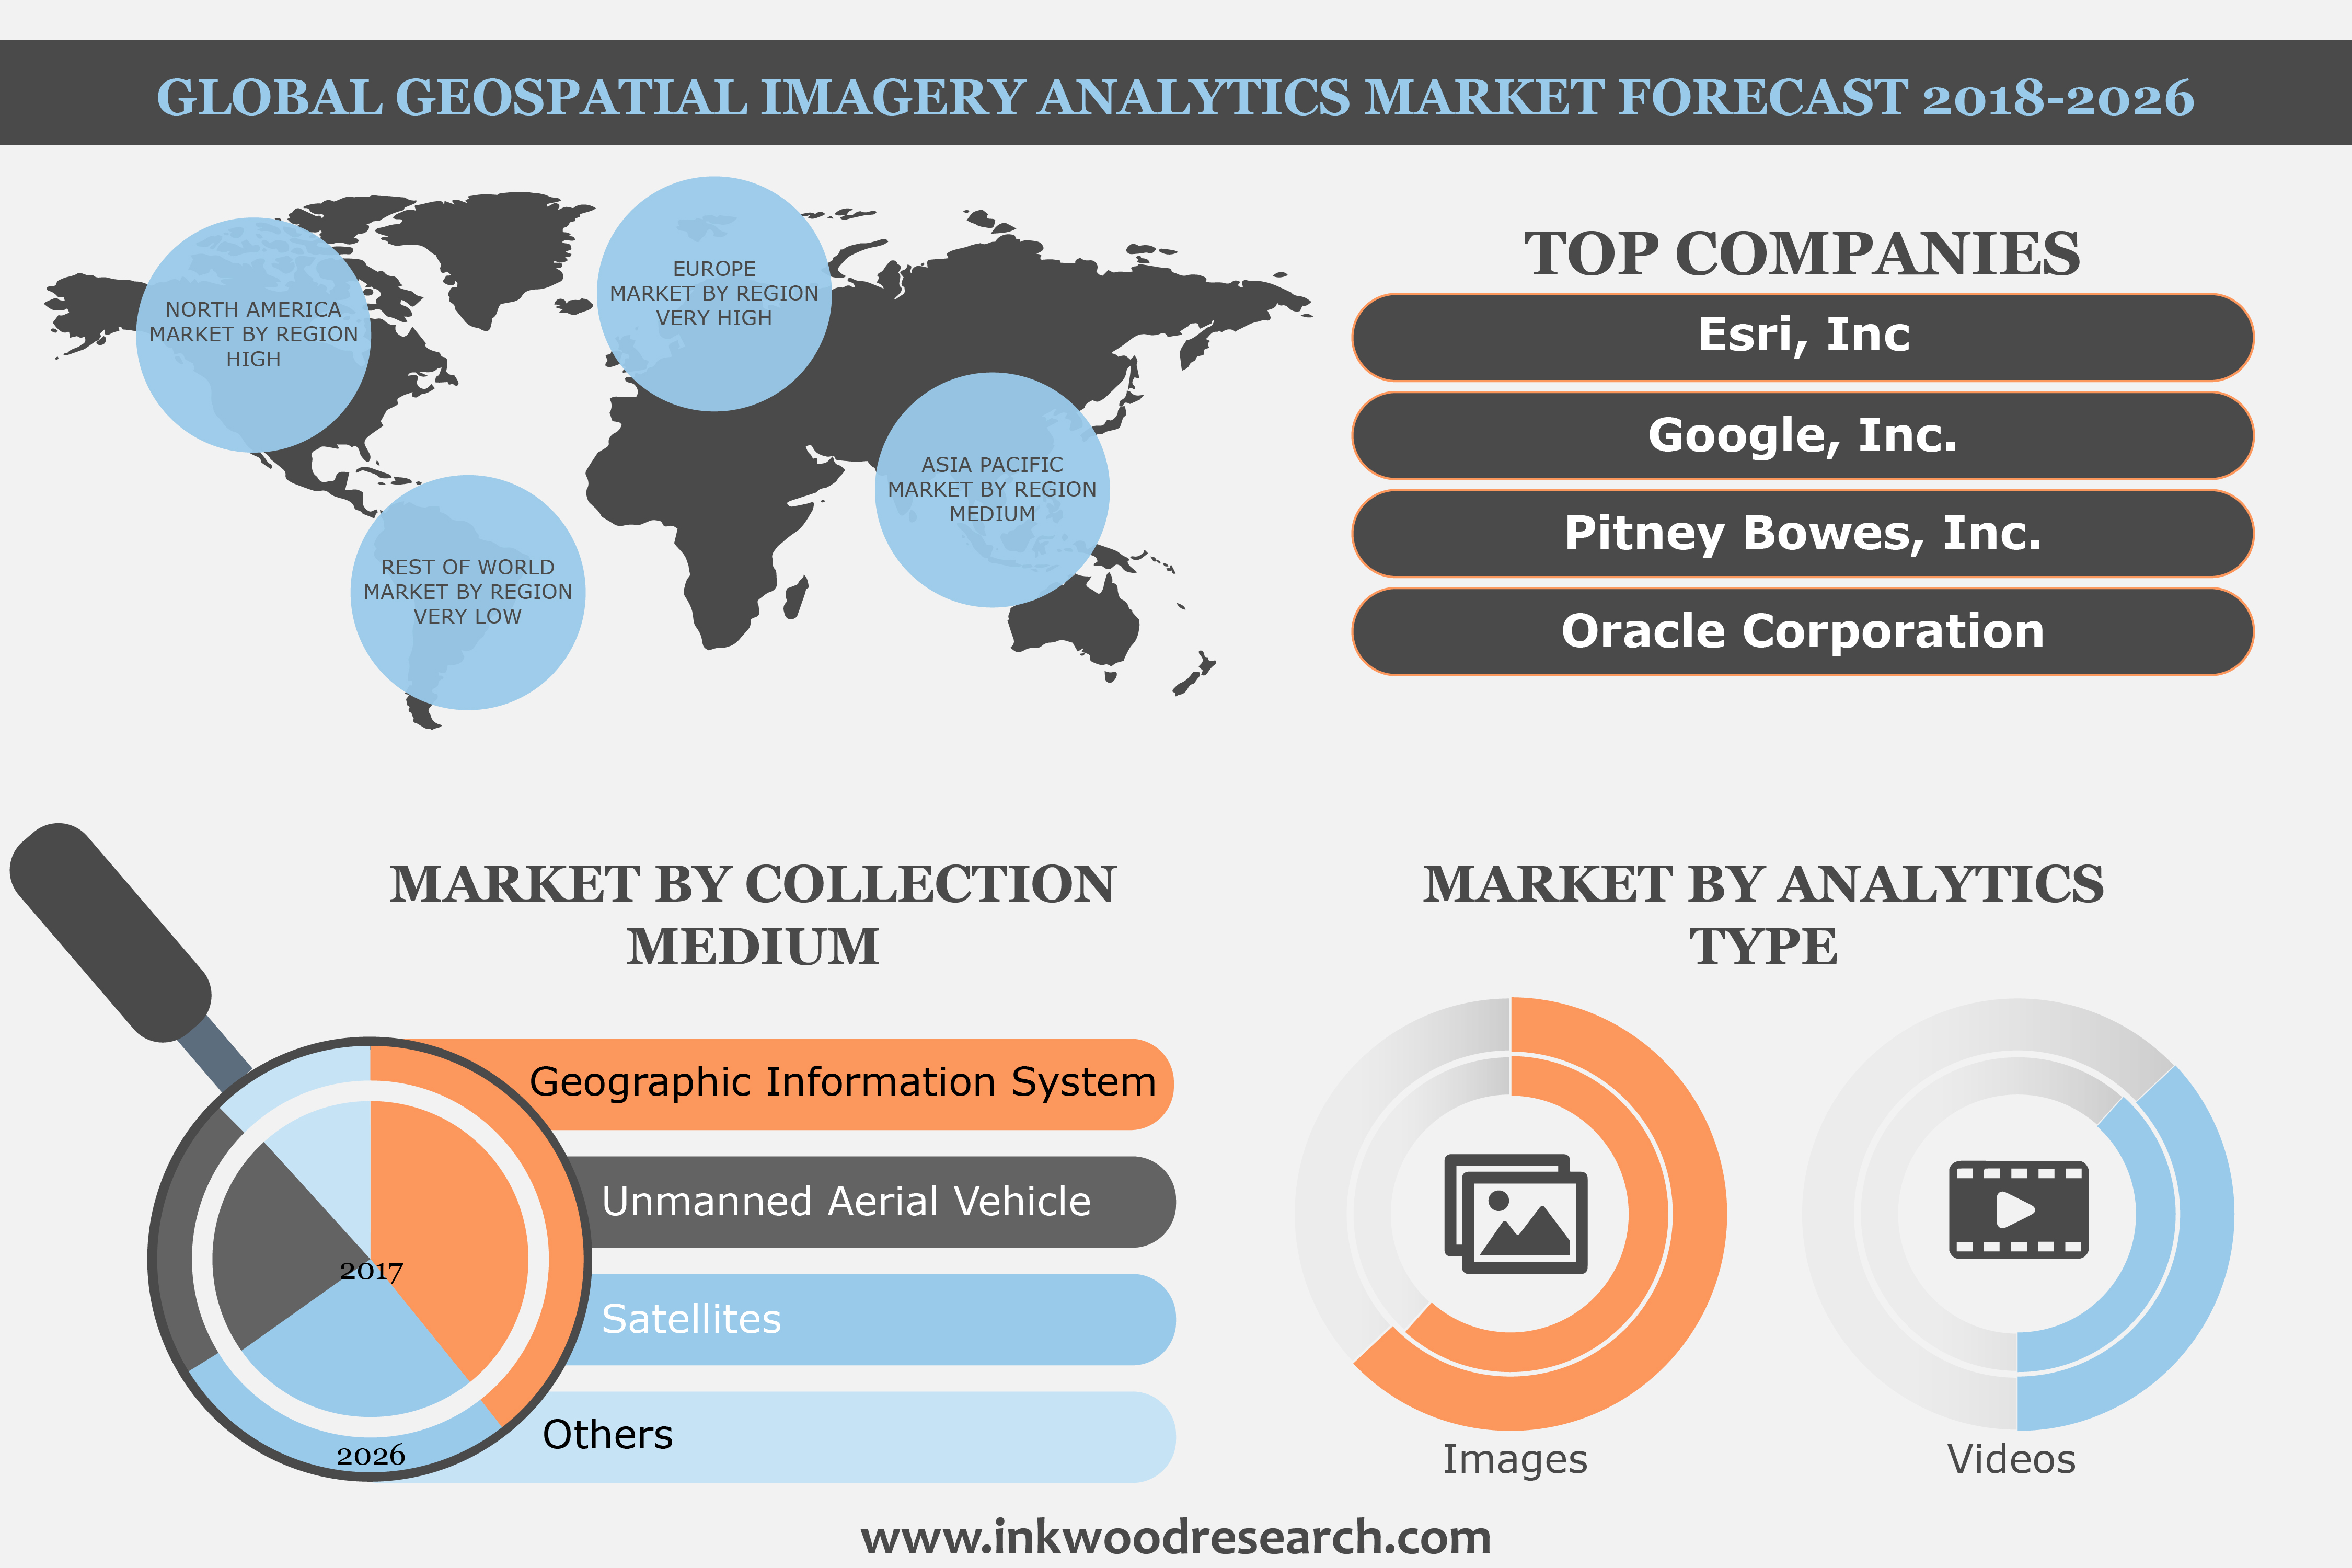 Global Geospatial Imagery Analytics Market to grow at a CAGR